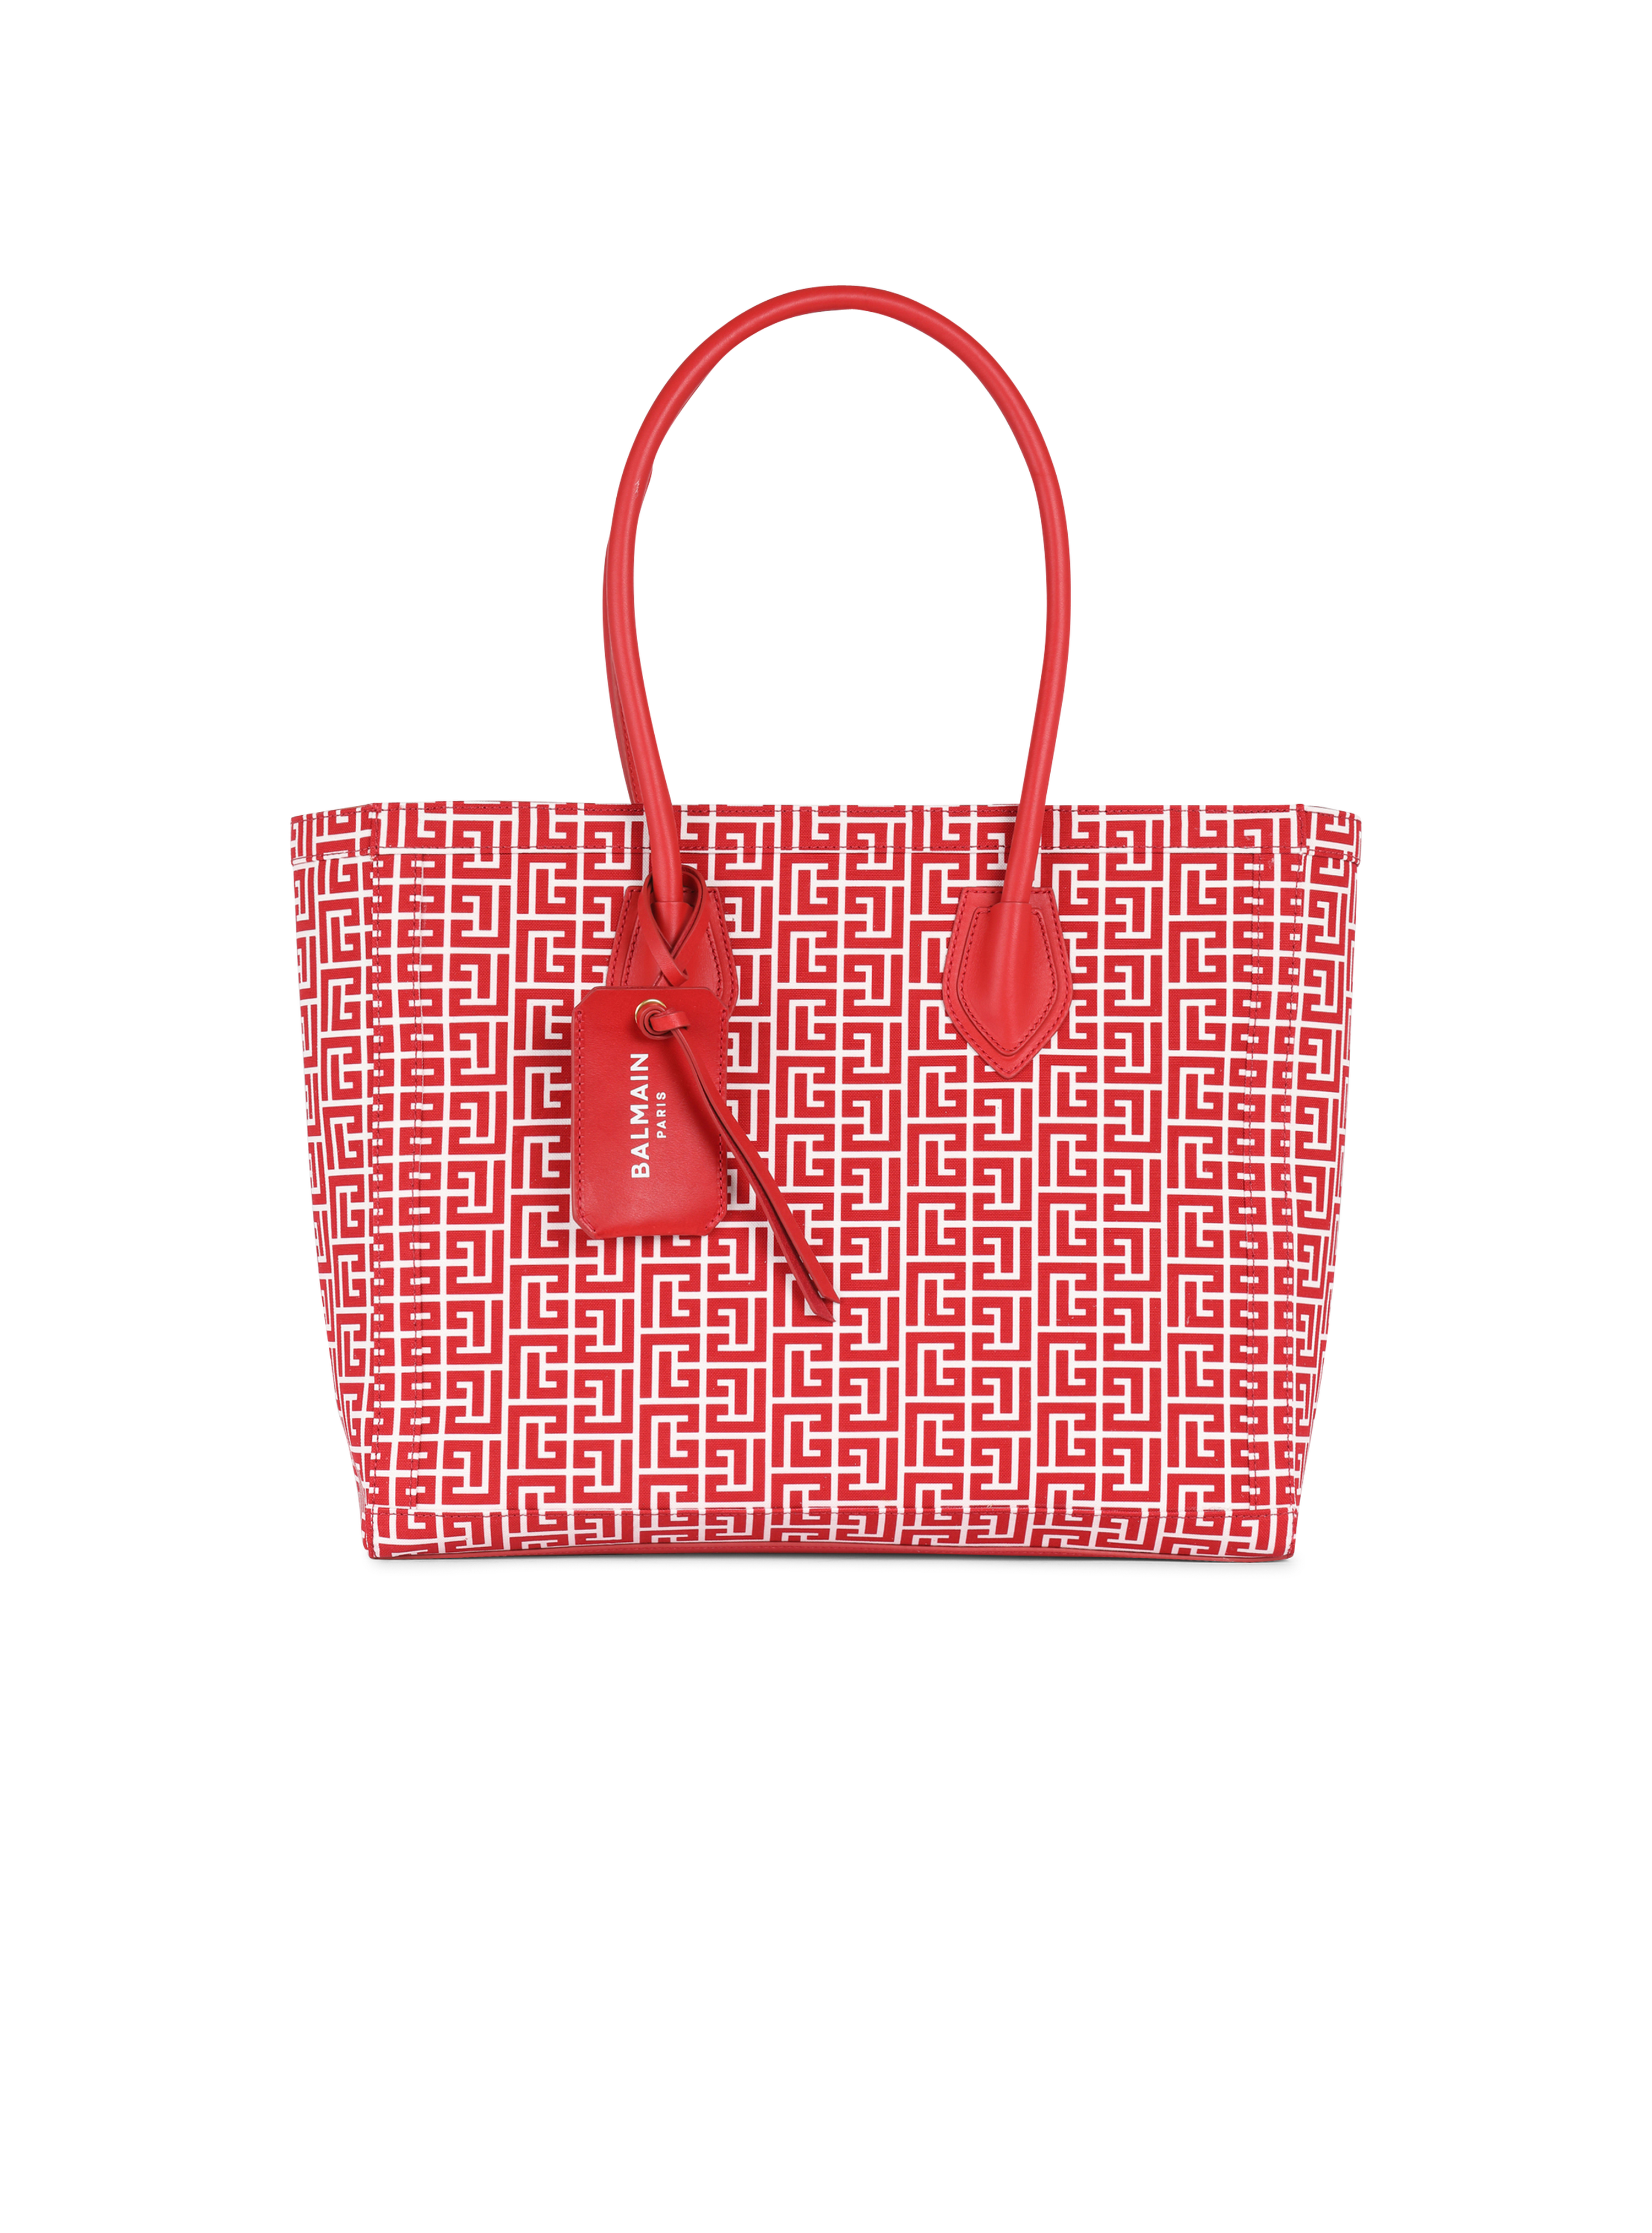 Monogram canvas B-Army 42 tote, red